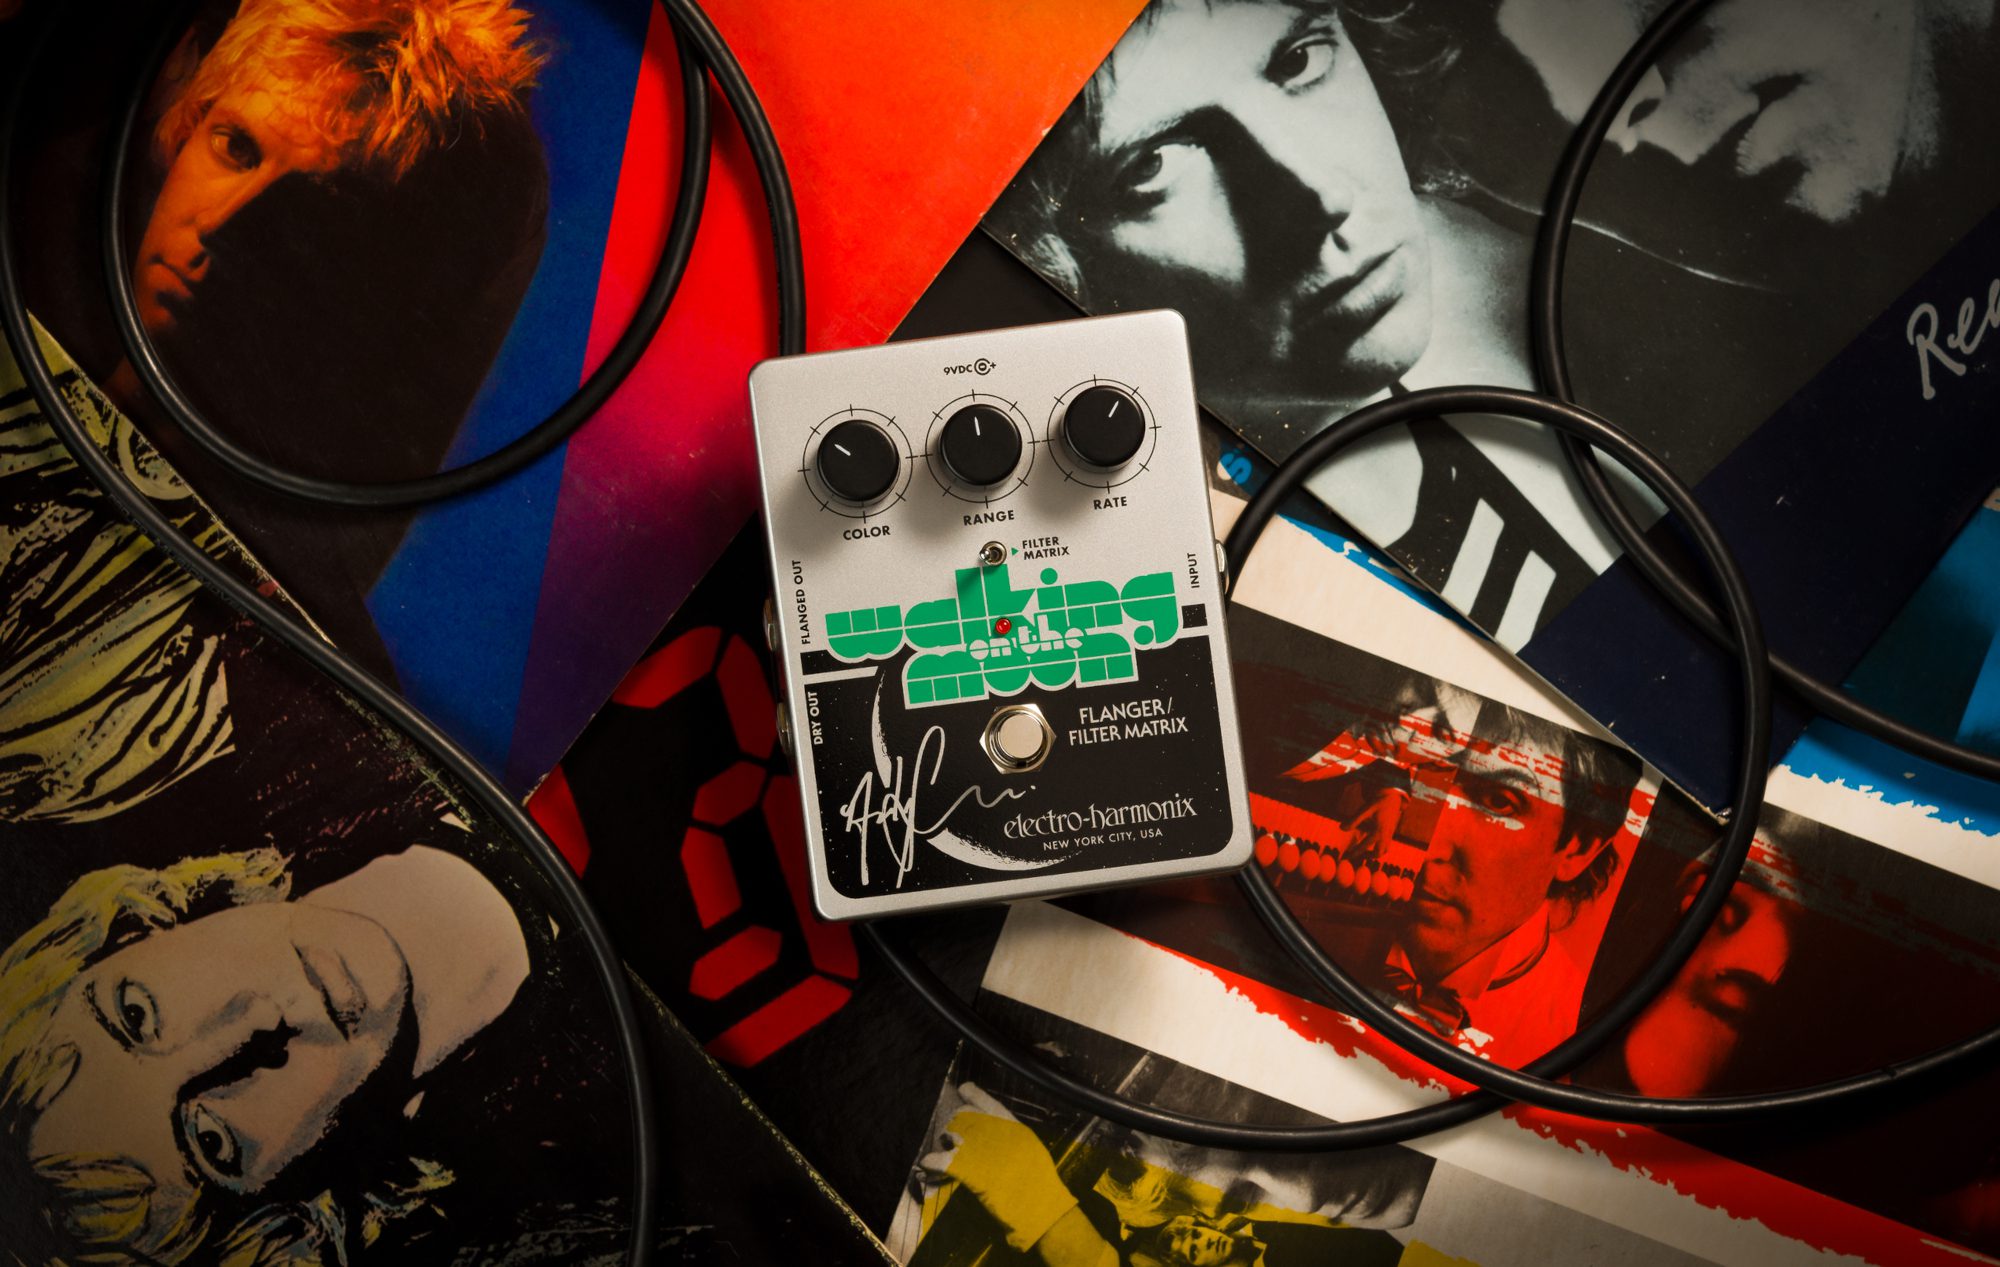 Electro-Harmonix Launches the Andy Summers Walking on the Moon Flanger Pedal